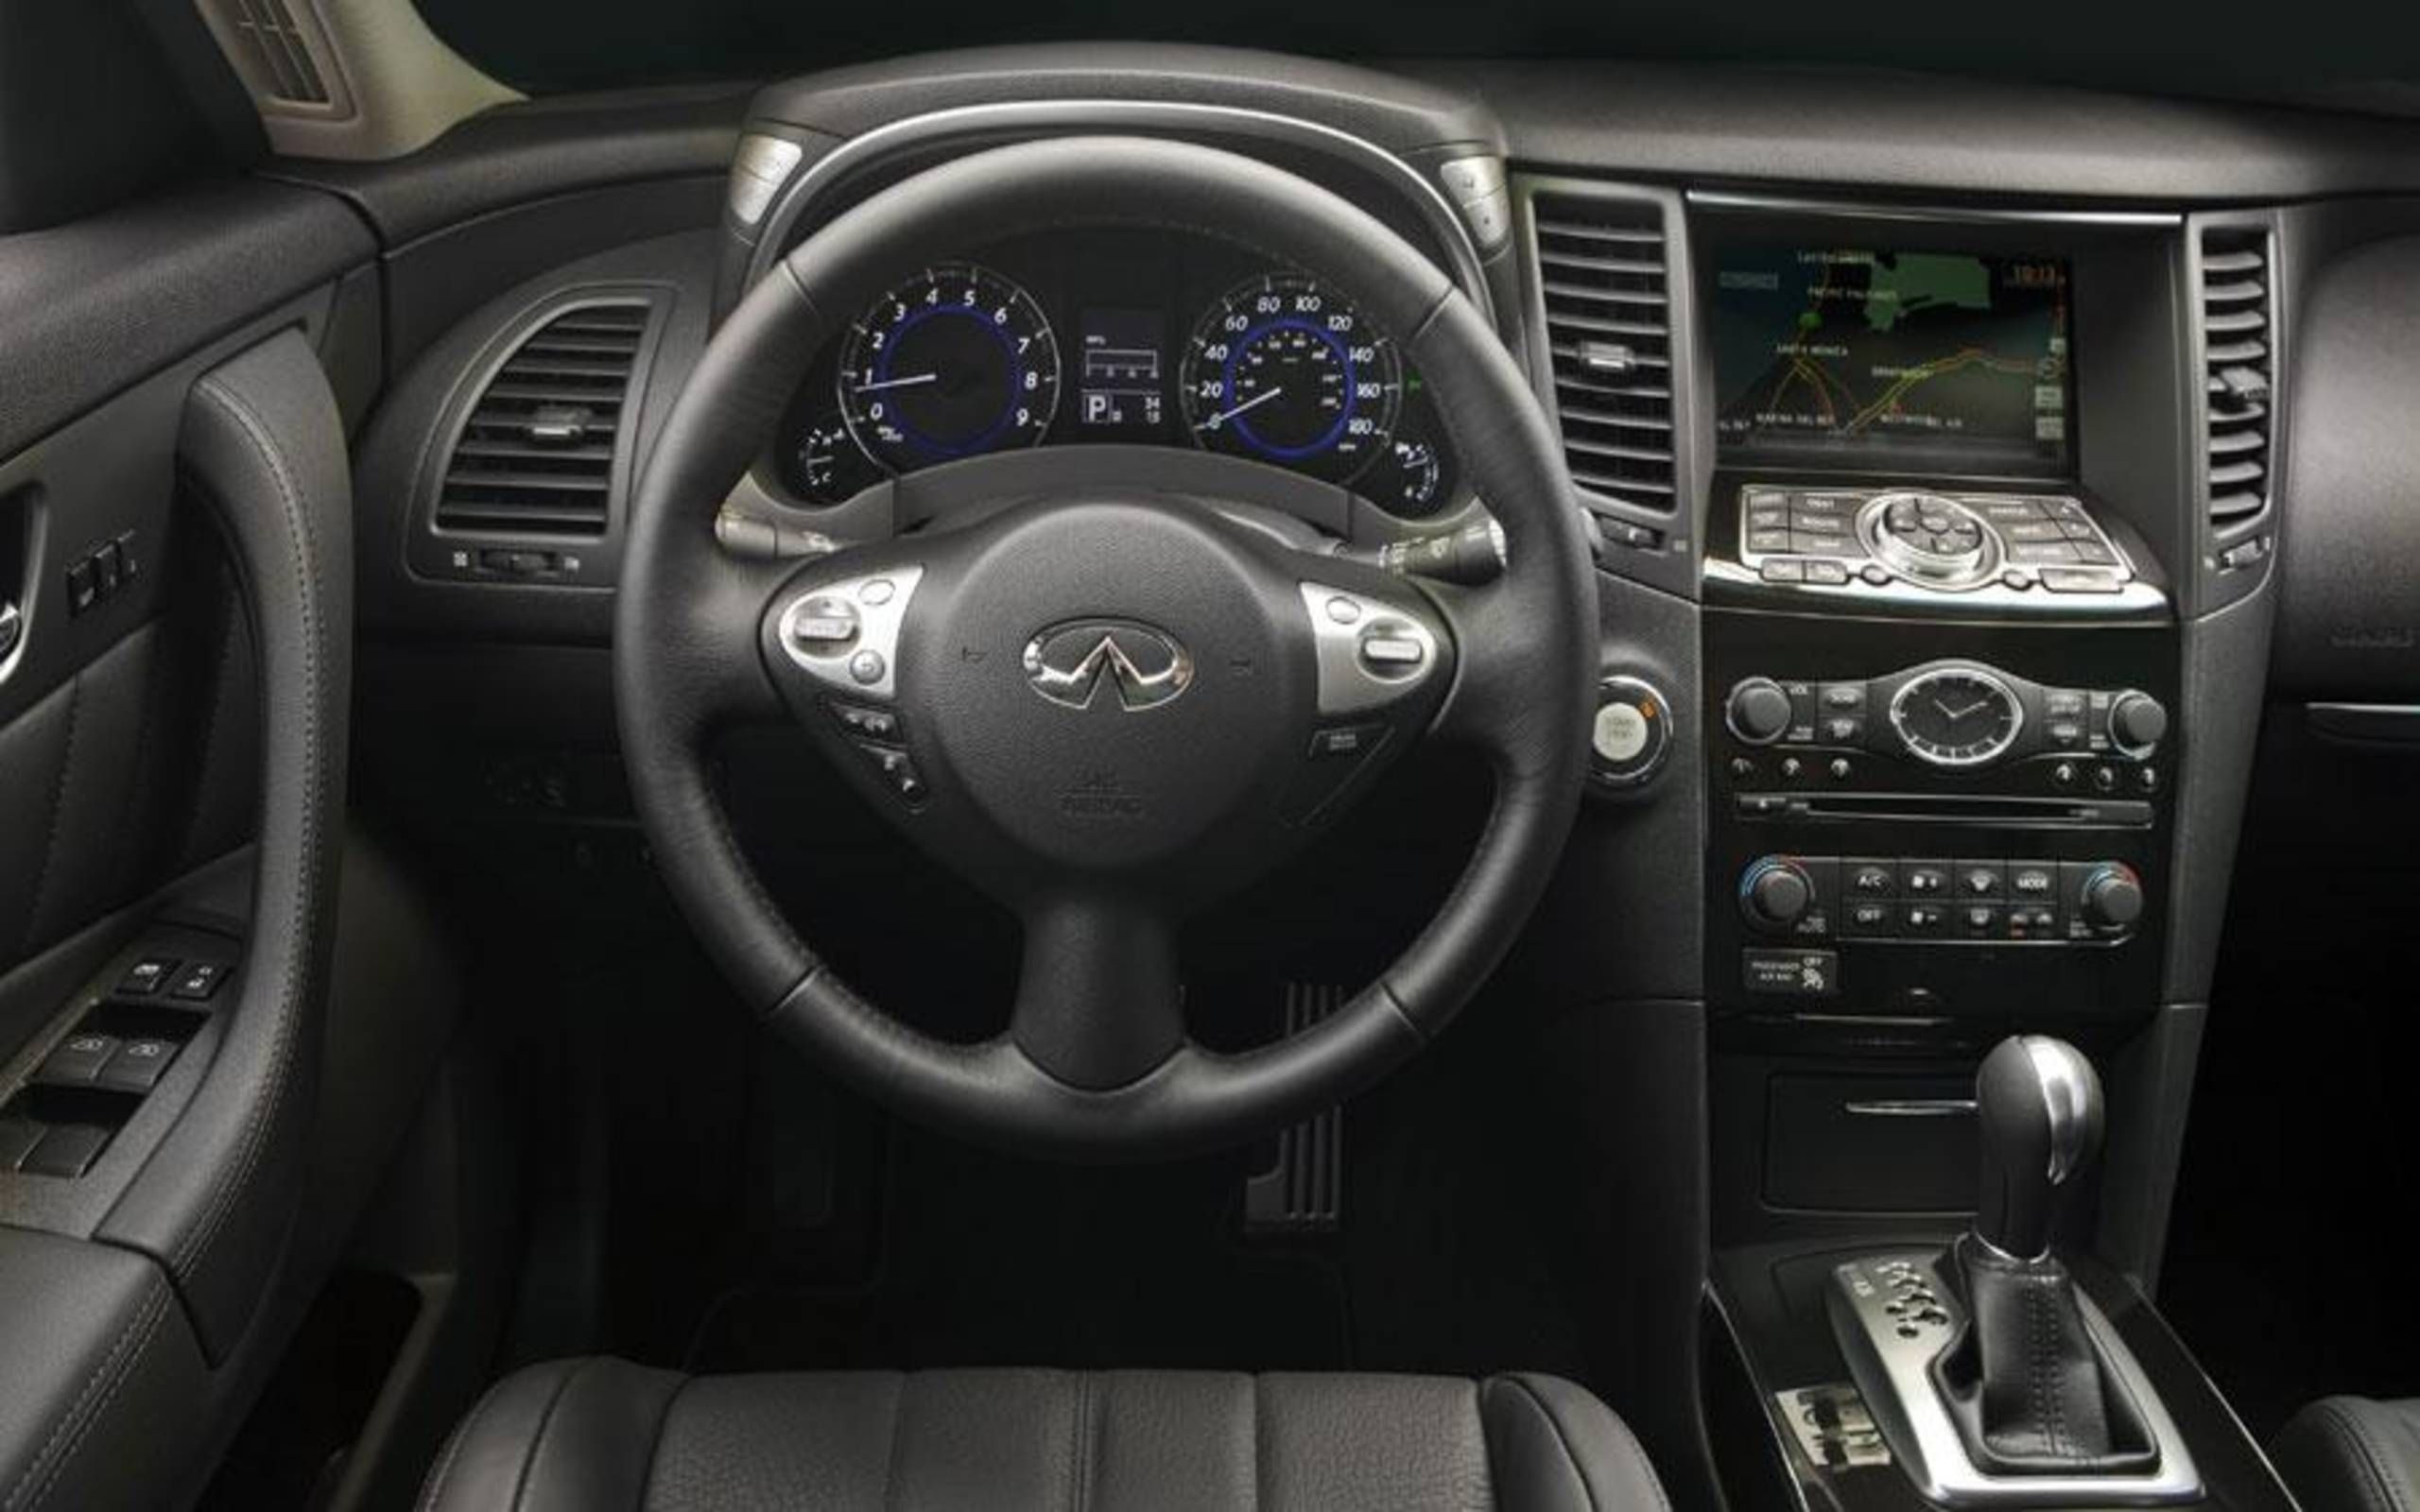 2012 Infiniti FX50 review notes: Oddball looks backed by plenty of power